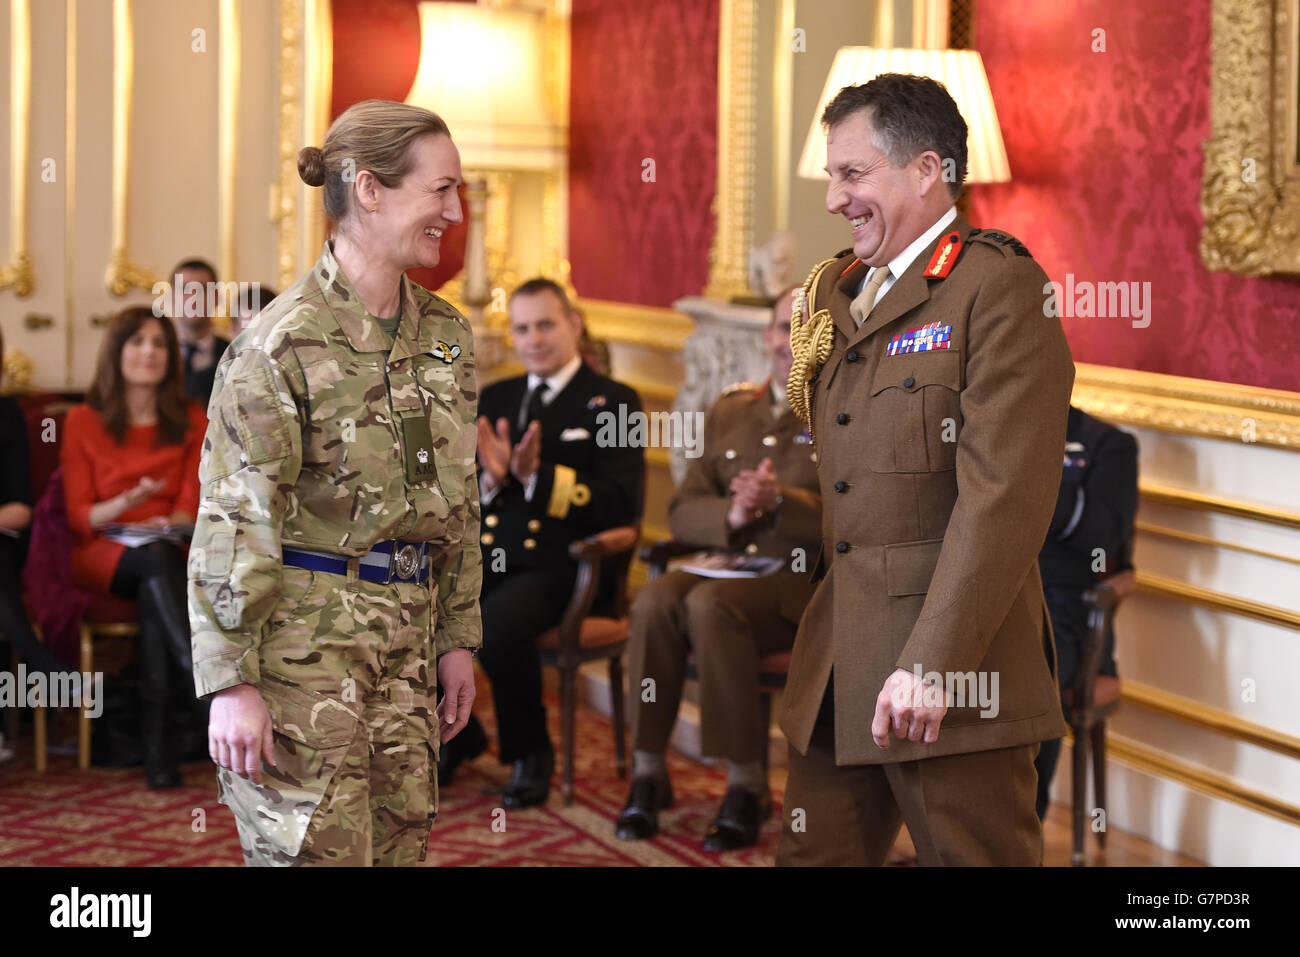 Chief of the General Staff, General Sir Nicholas Carter (right) shakes the hand of Flight Lieutenant Laura Alice Hilary Nicholson of the Royal Air Force as she is named as being awarded the Distinguished Flying Cross (DFC) during an event at Lancaster House, London where the latest Operational Honours and Awards was announced. Stock Photo